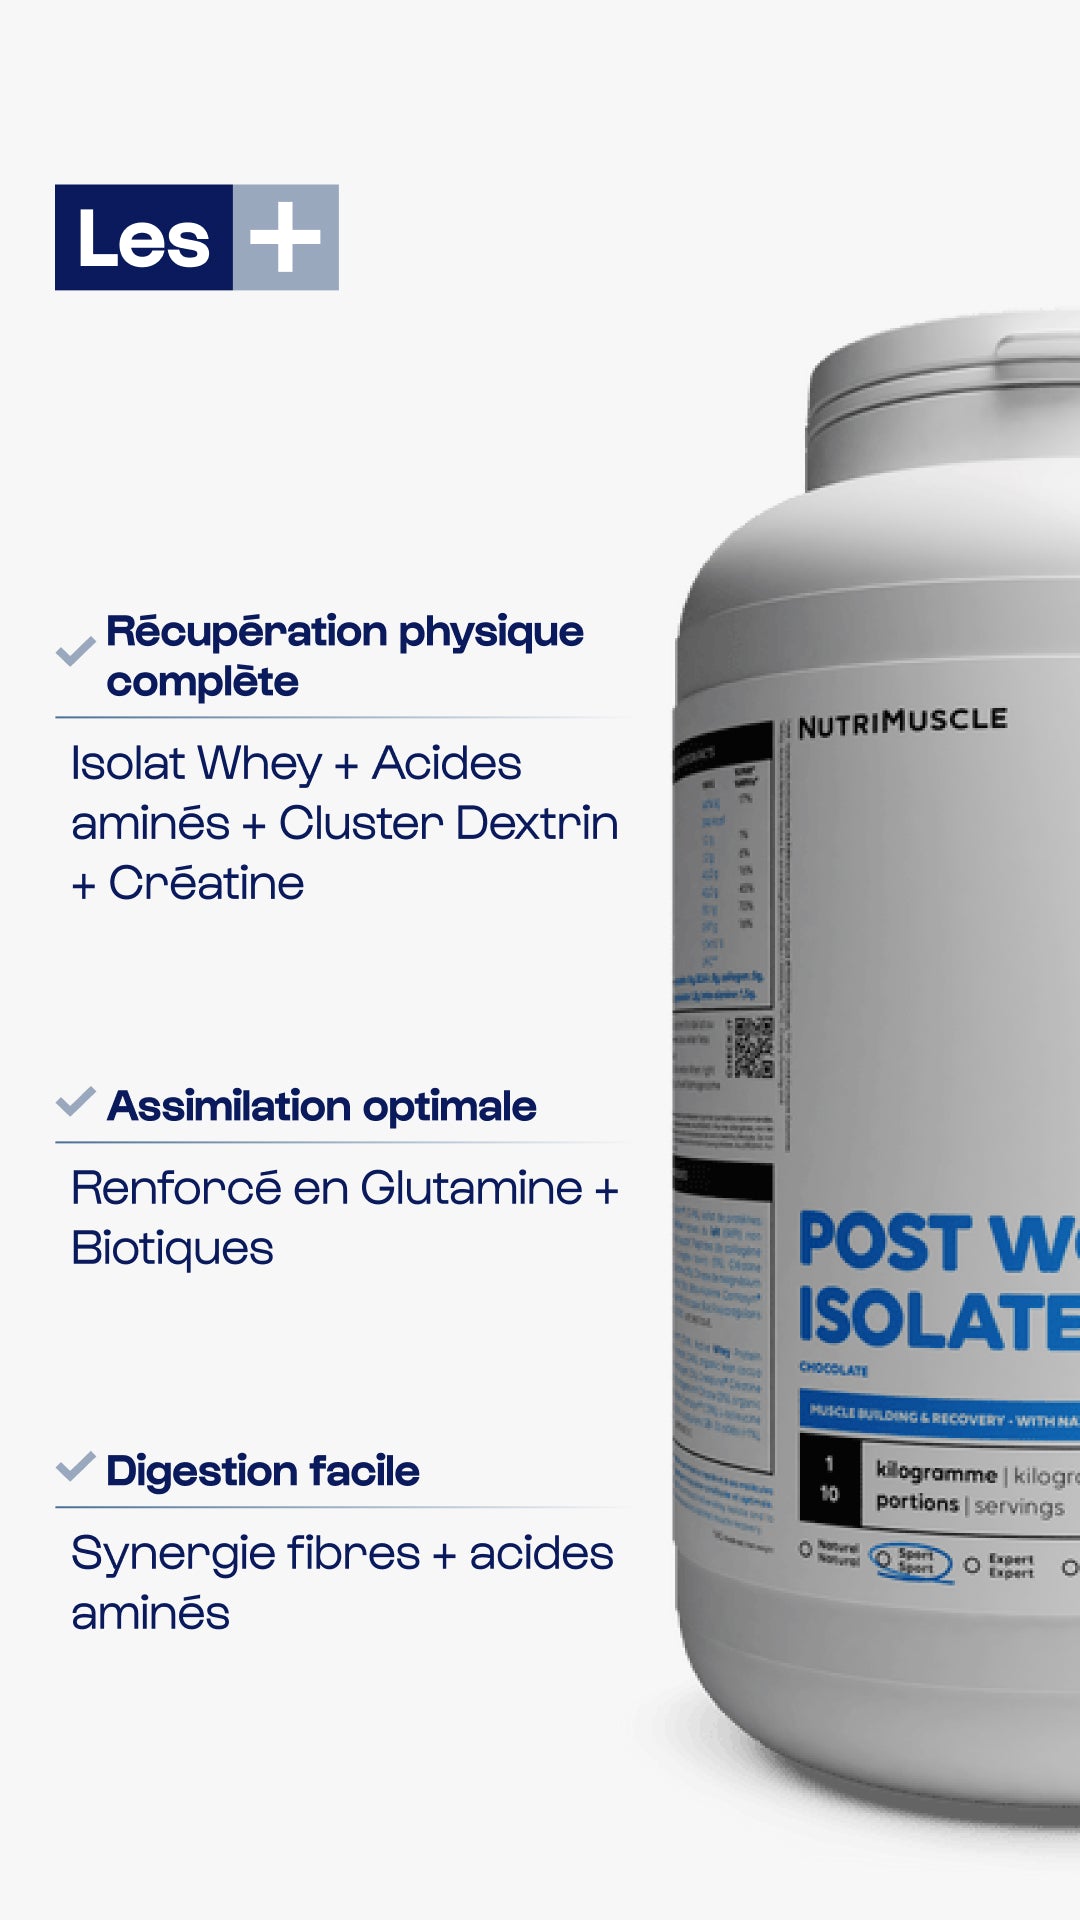 Post Workout Isolate Blend